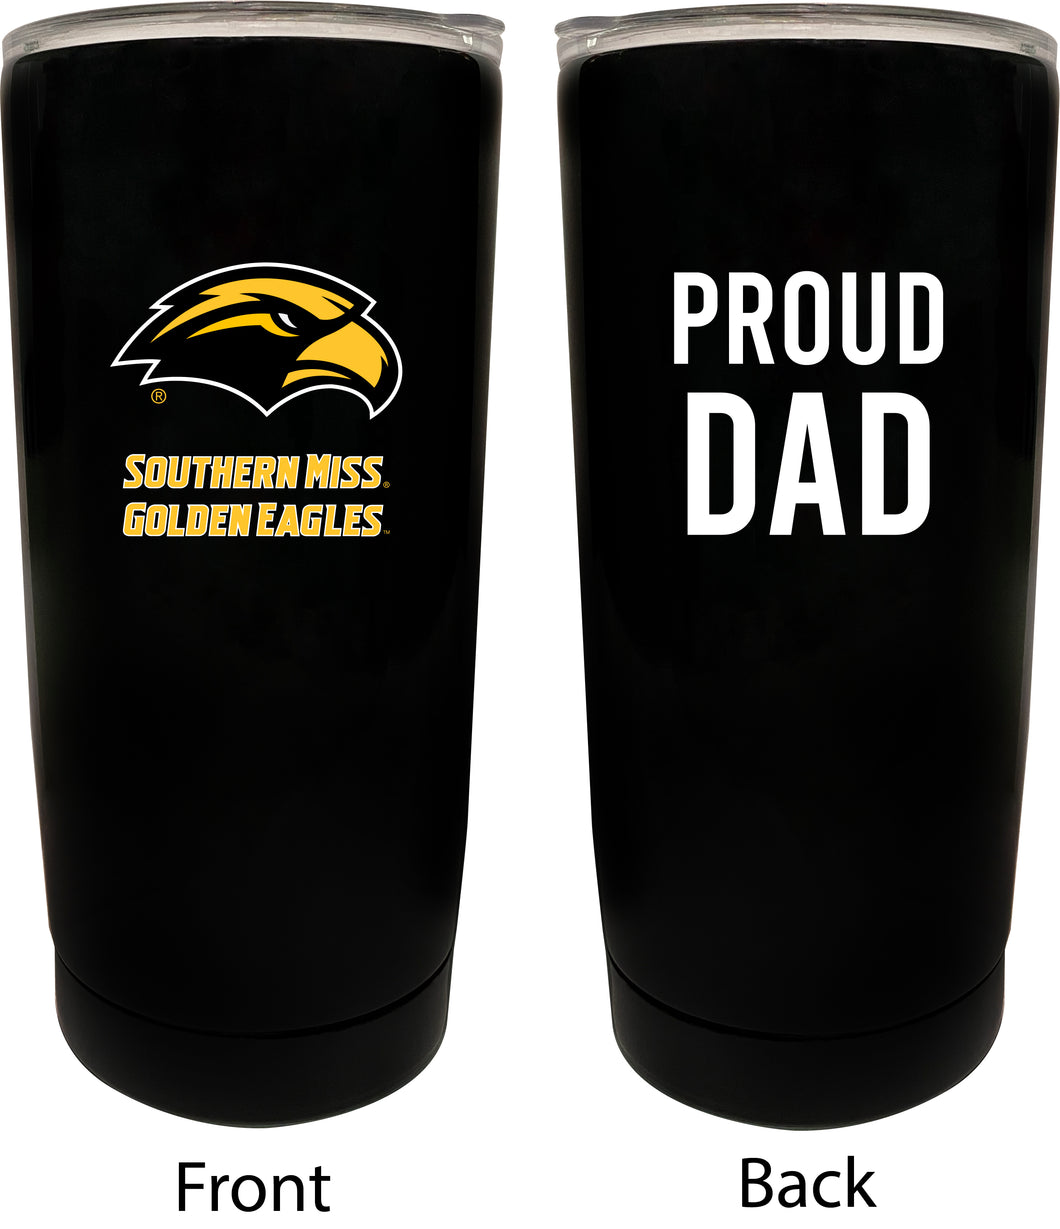 Southern Mississippi Golden Eagles NCAA Insulated Tumbler - 16oz Stainless Steel Travel Mug Proud Dad Design Black